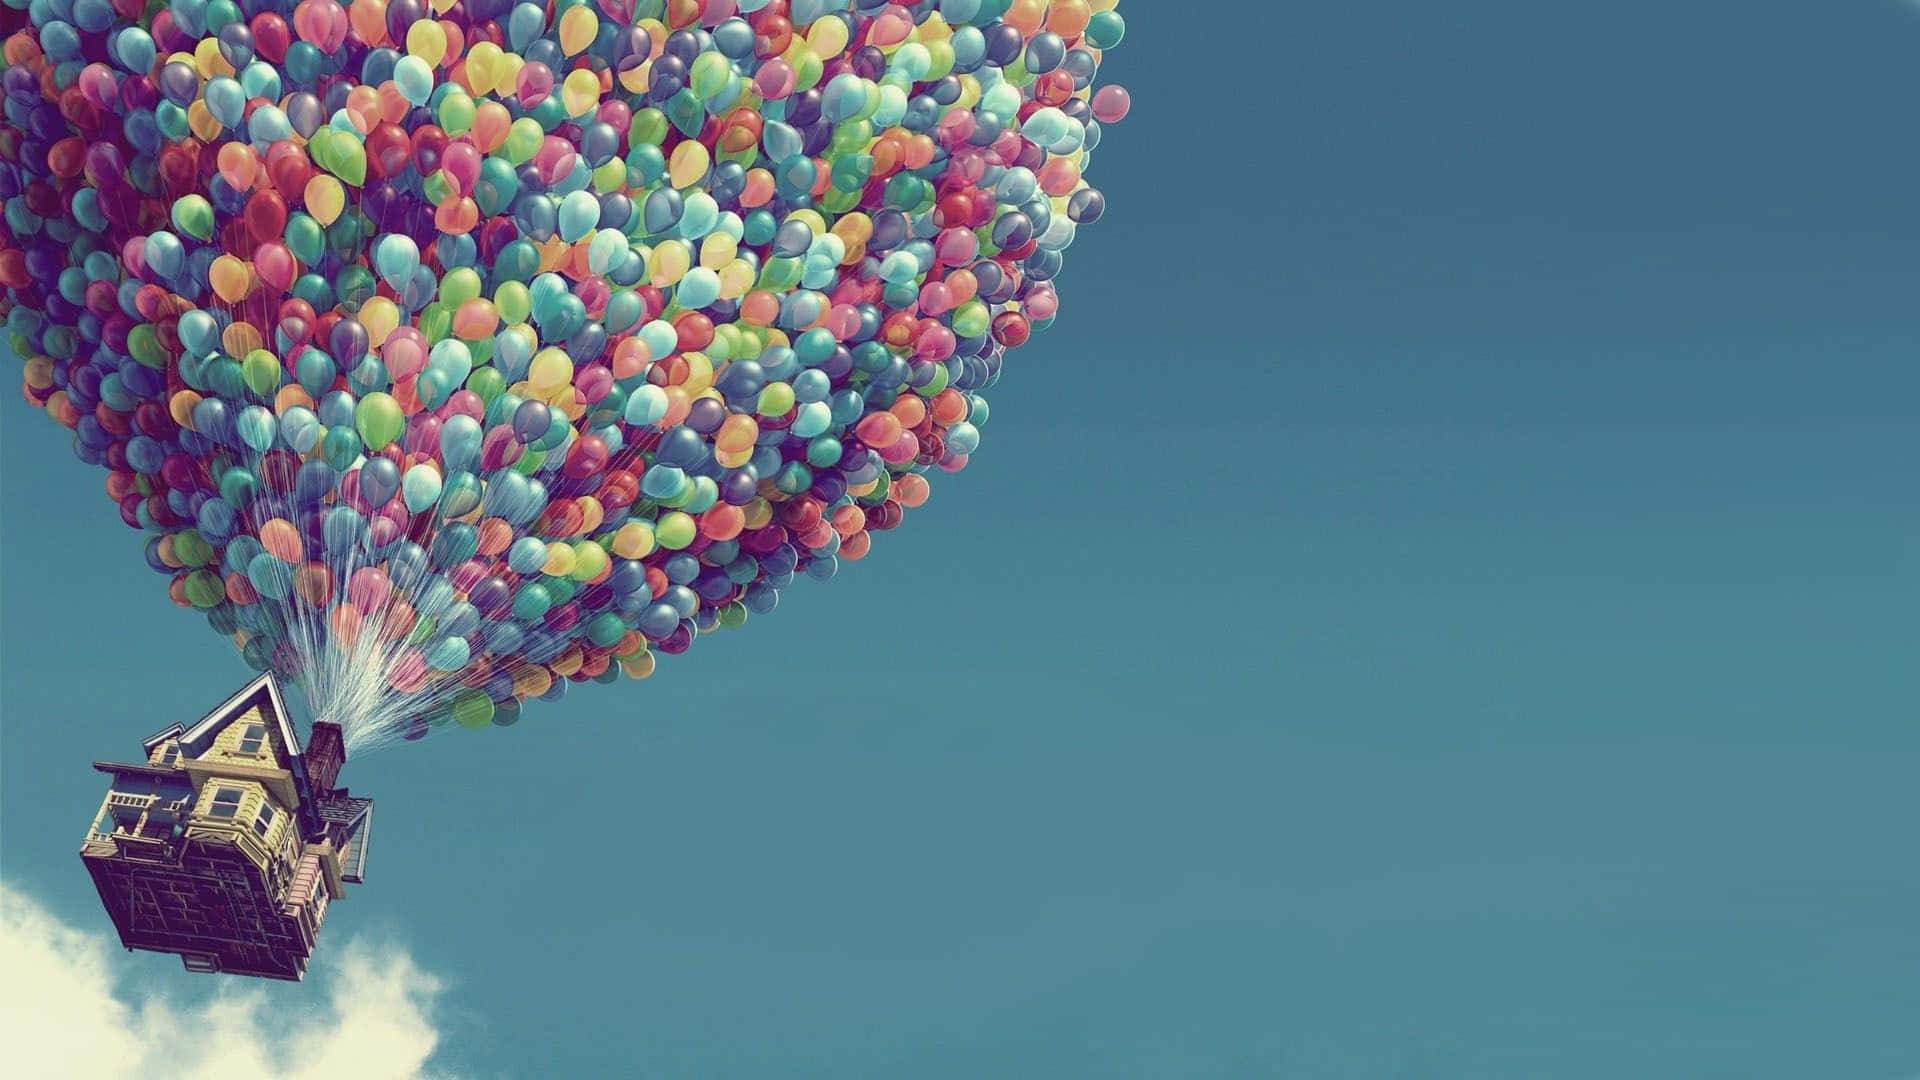 A House With Balloons Flying In The Sky Background